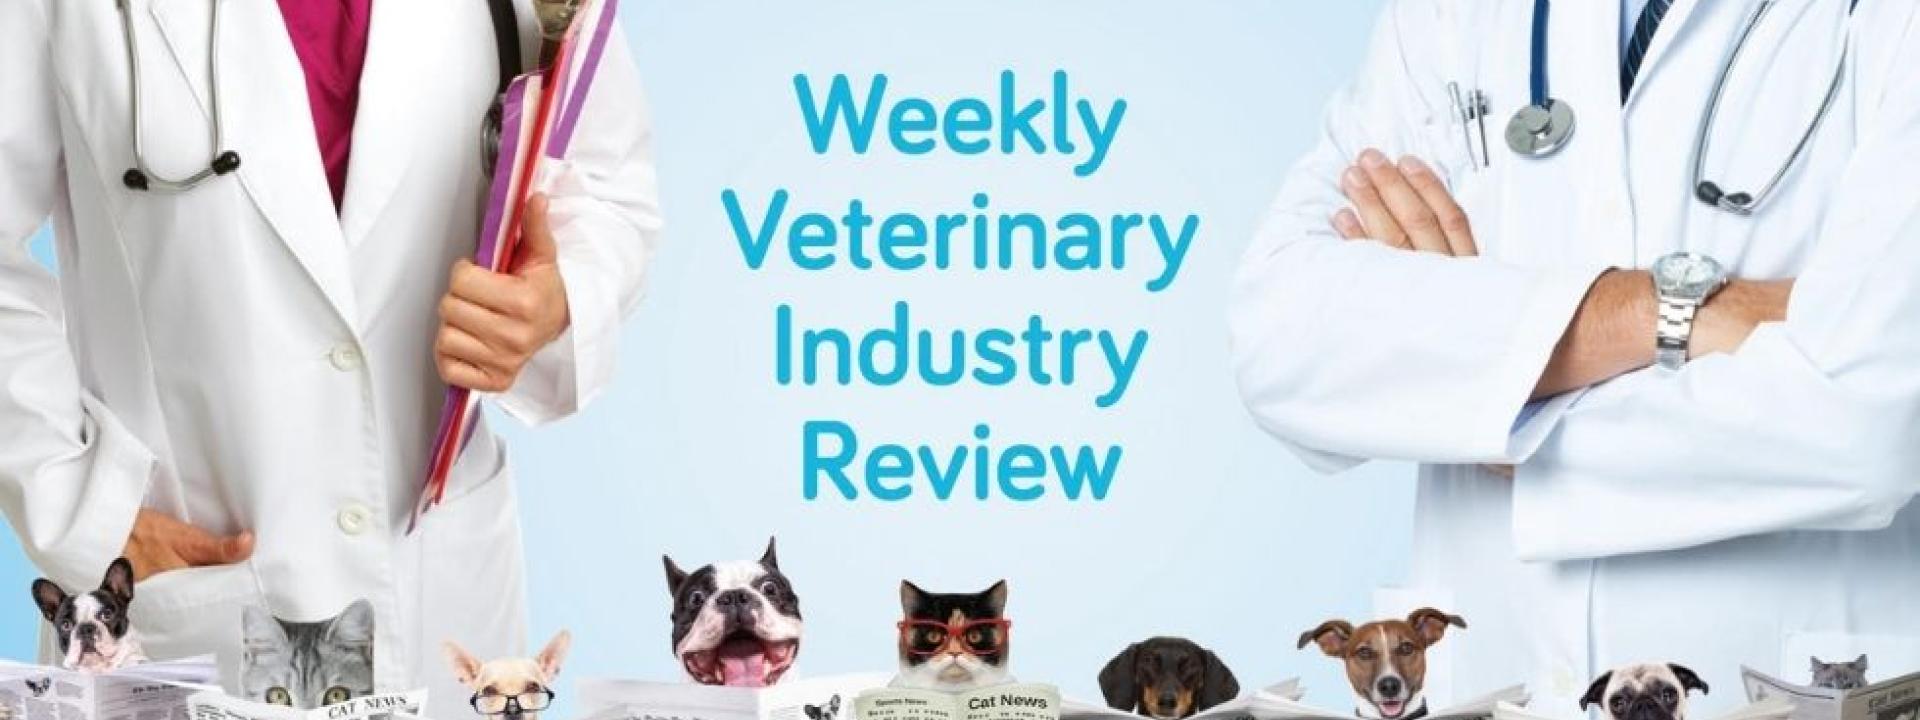 Weekly Veterinary Industry Review Brought to You By GeniusVets